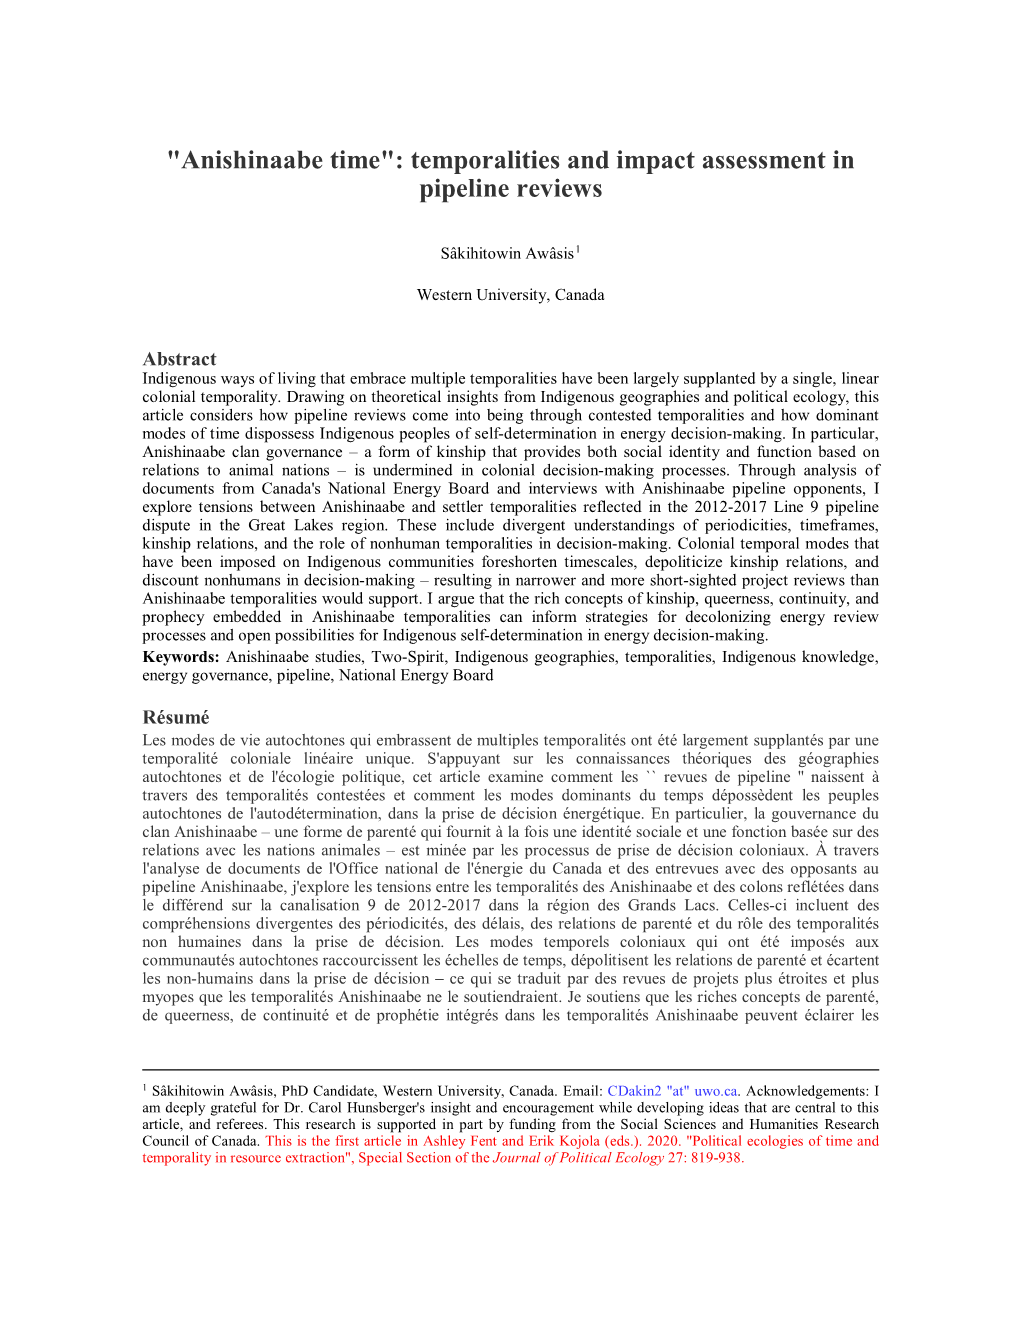 Anishinaabe Time": Temporalities and Impact Assessment in Pipeline Reviews